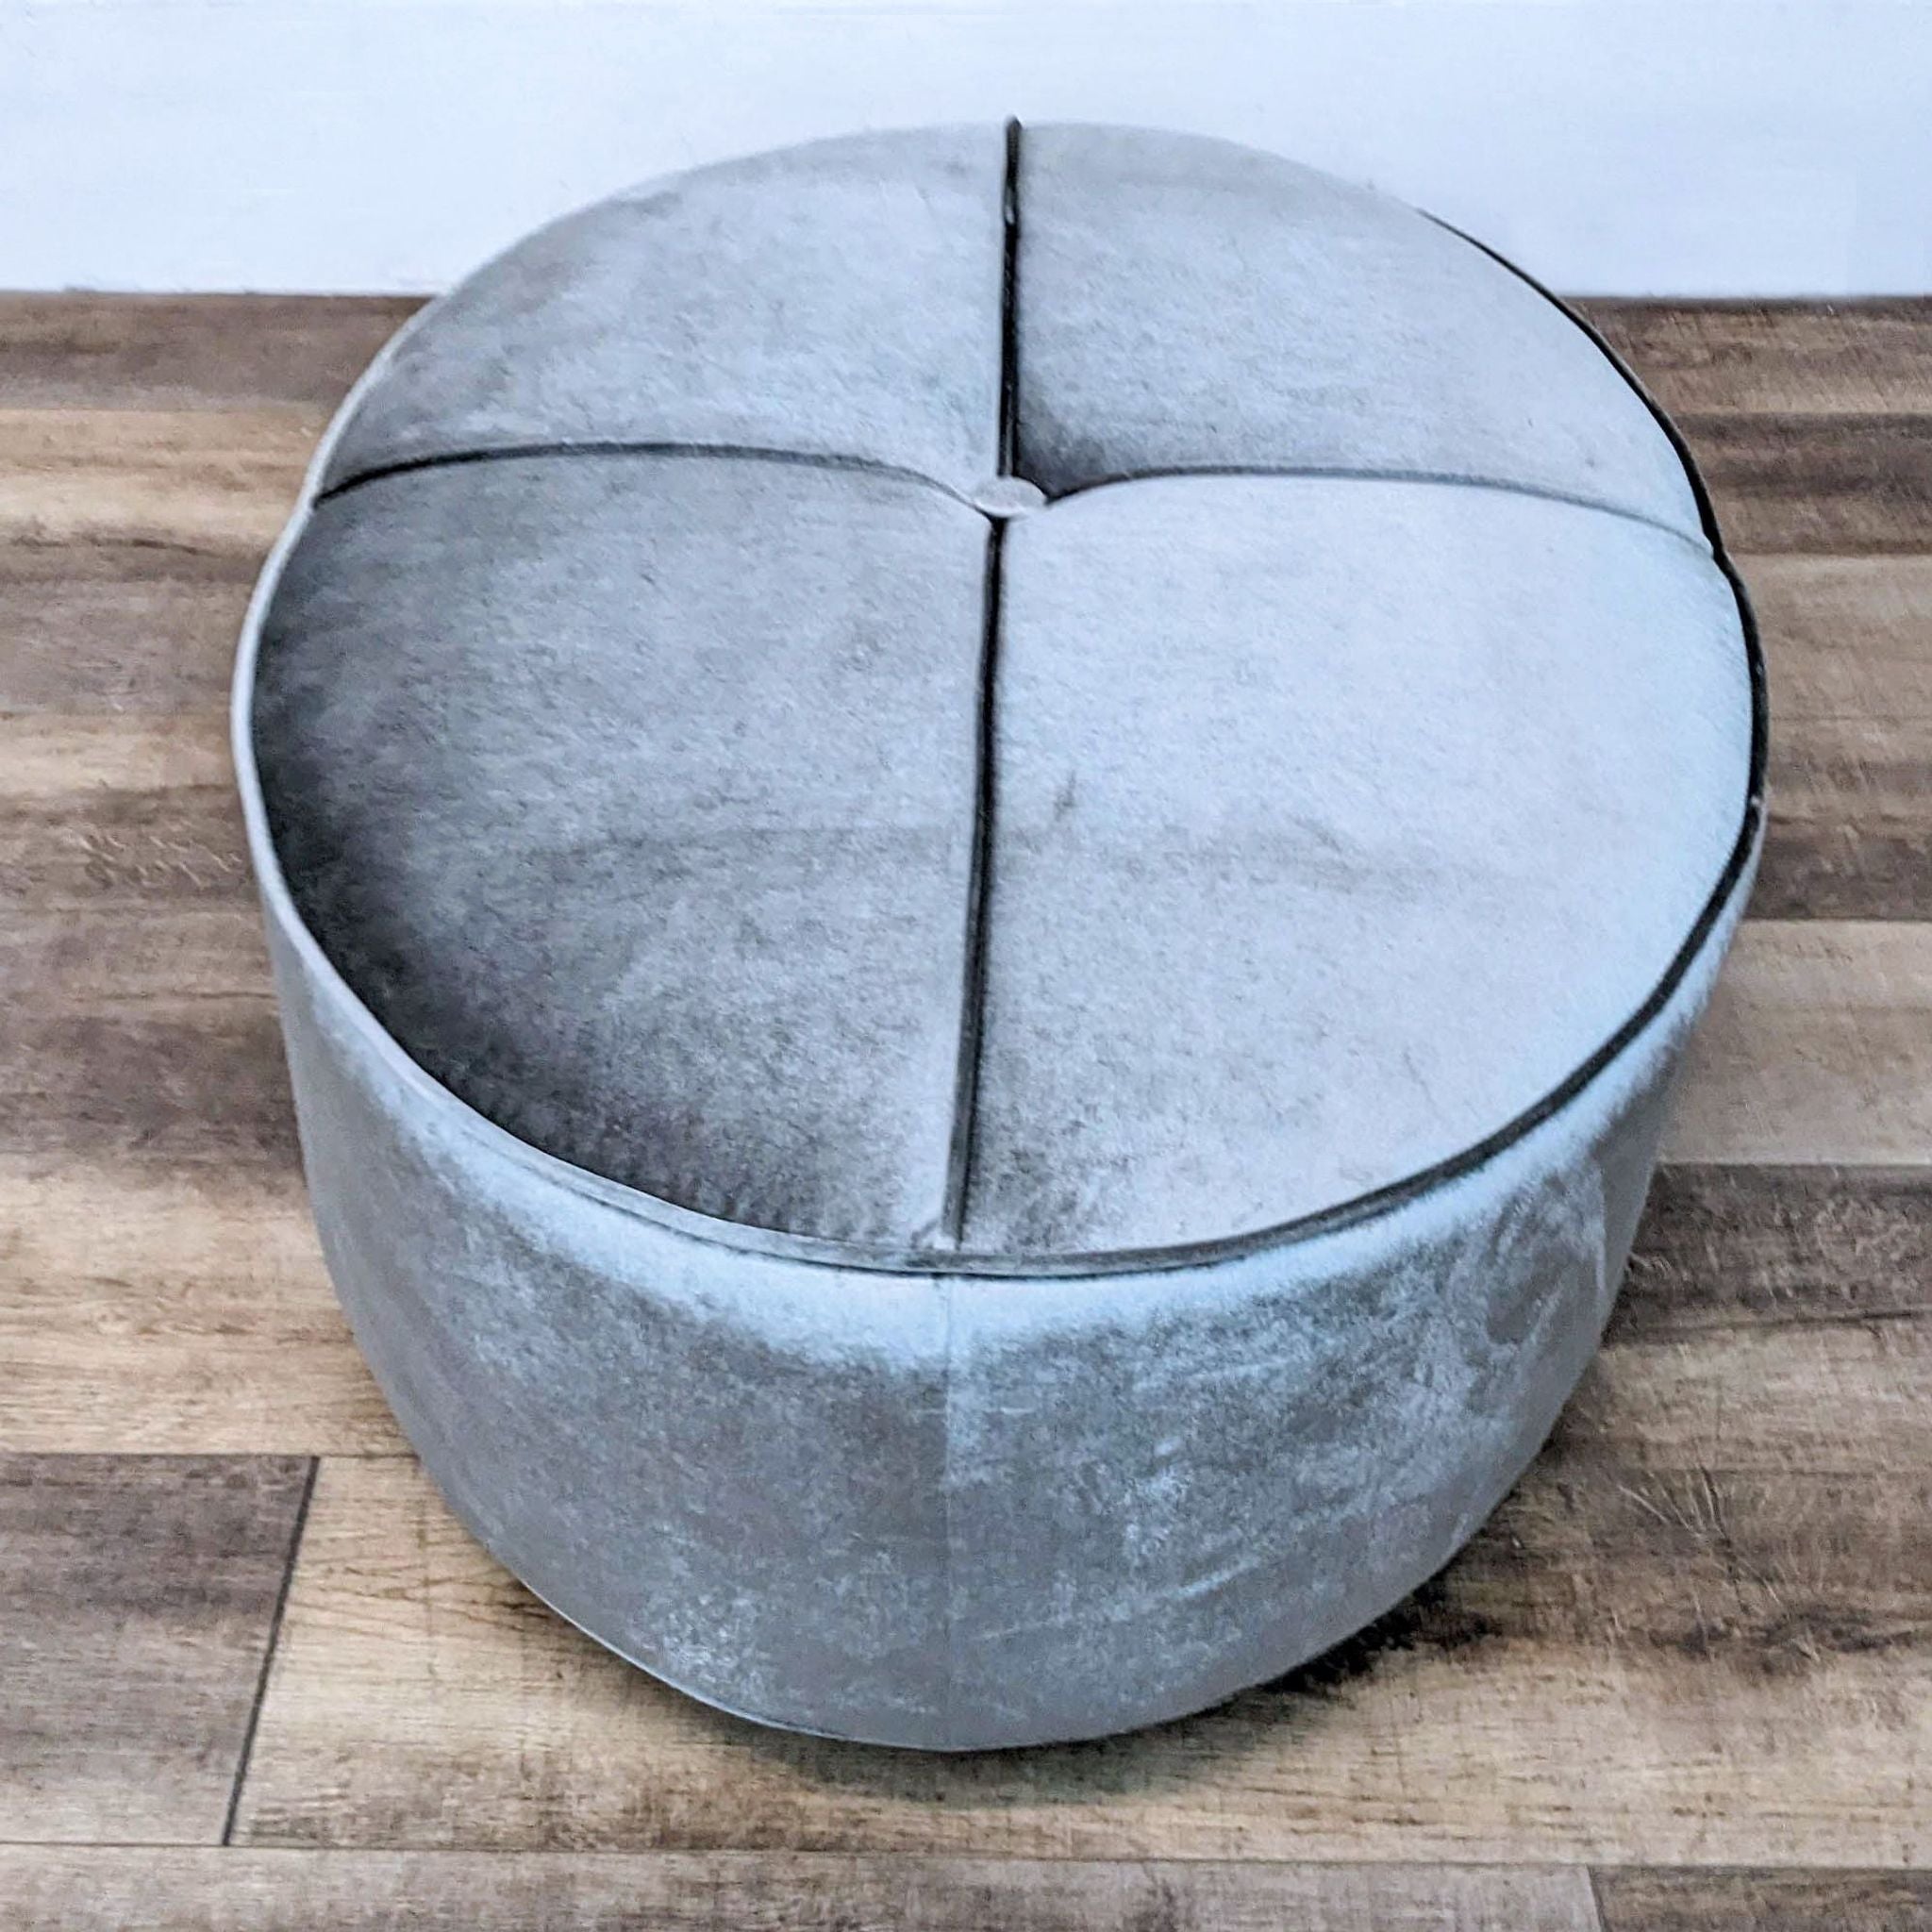 Coaster brand ottoman featuring sleek oval shape, piping detail, and metal-look base.